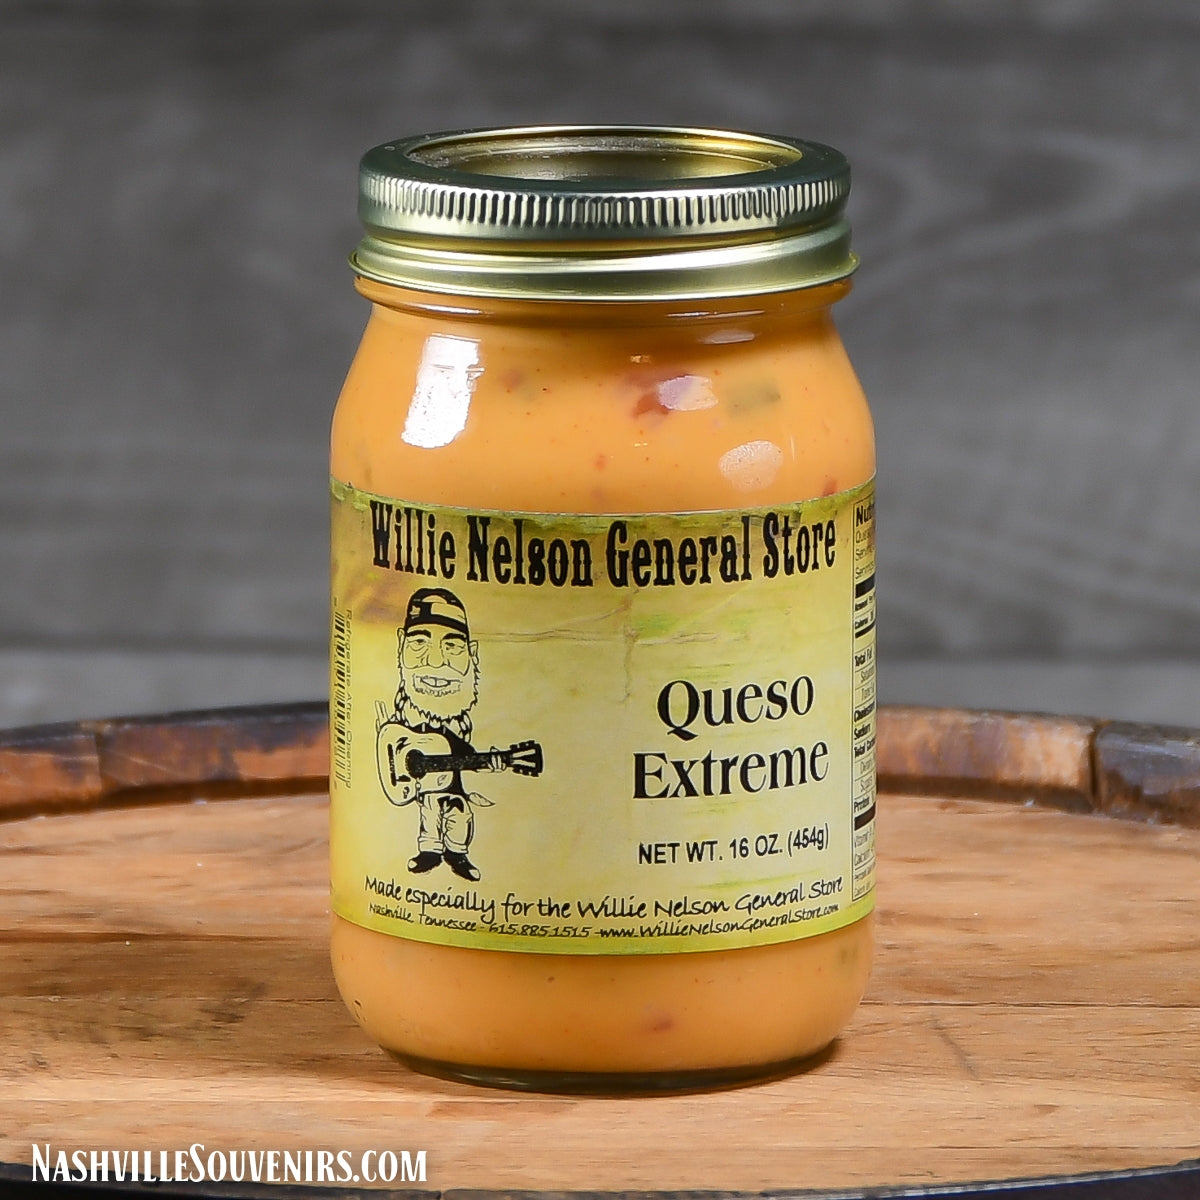 Willie Nelson General Store Queso Extreme Cheese Dip